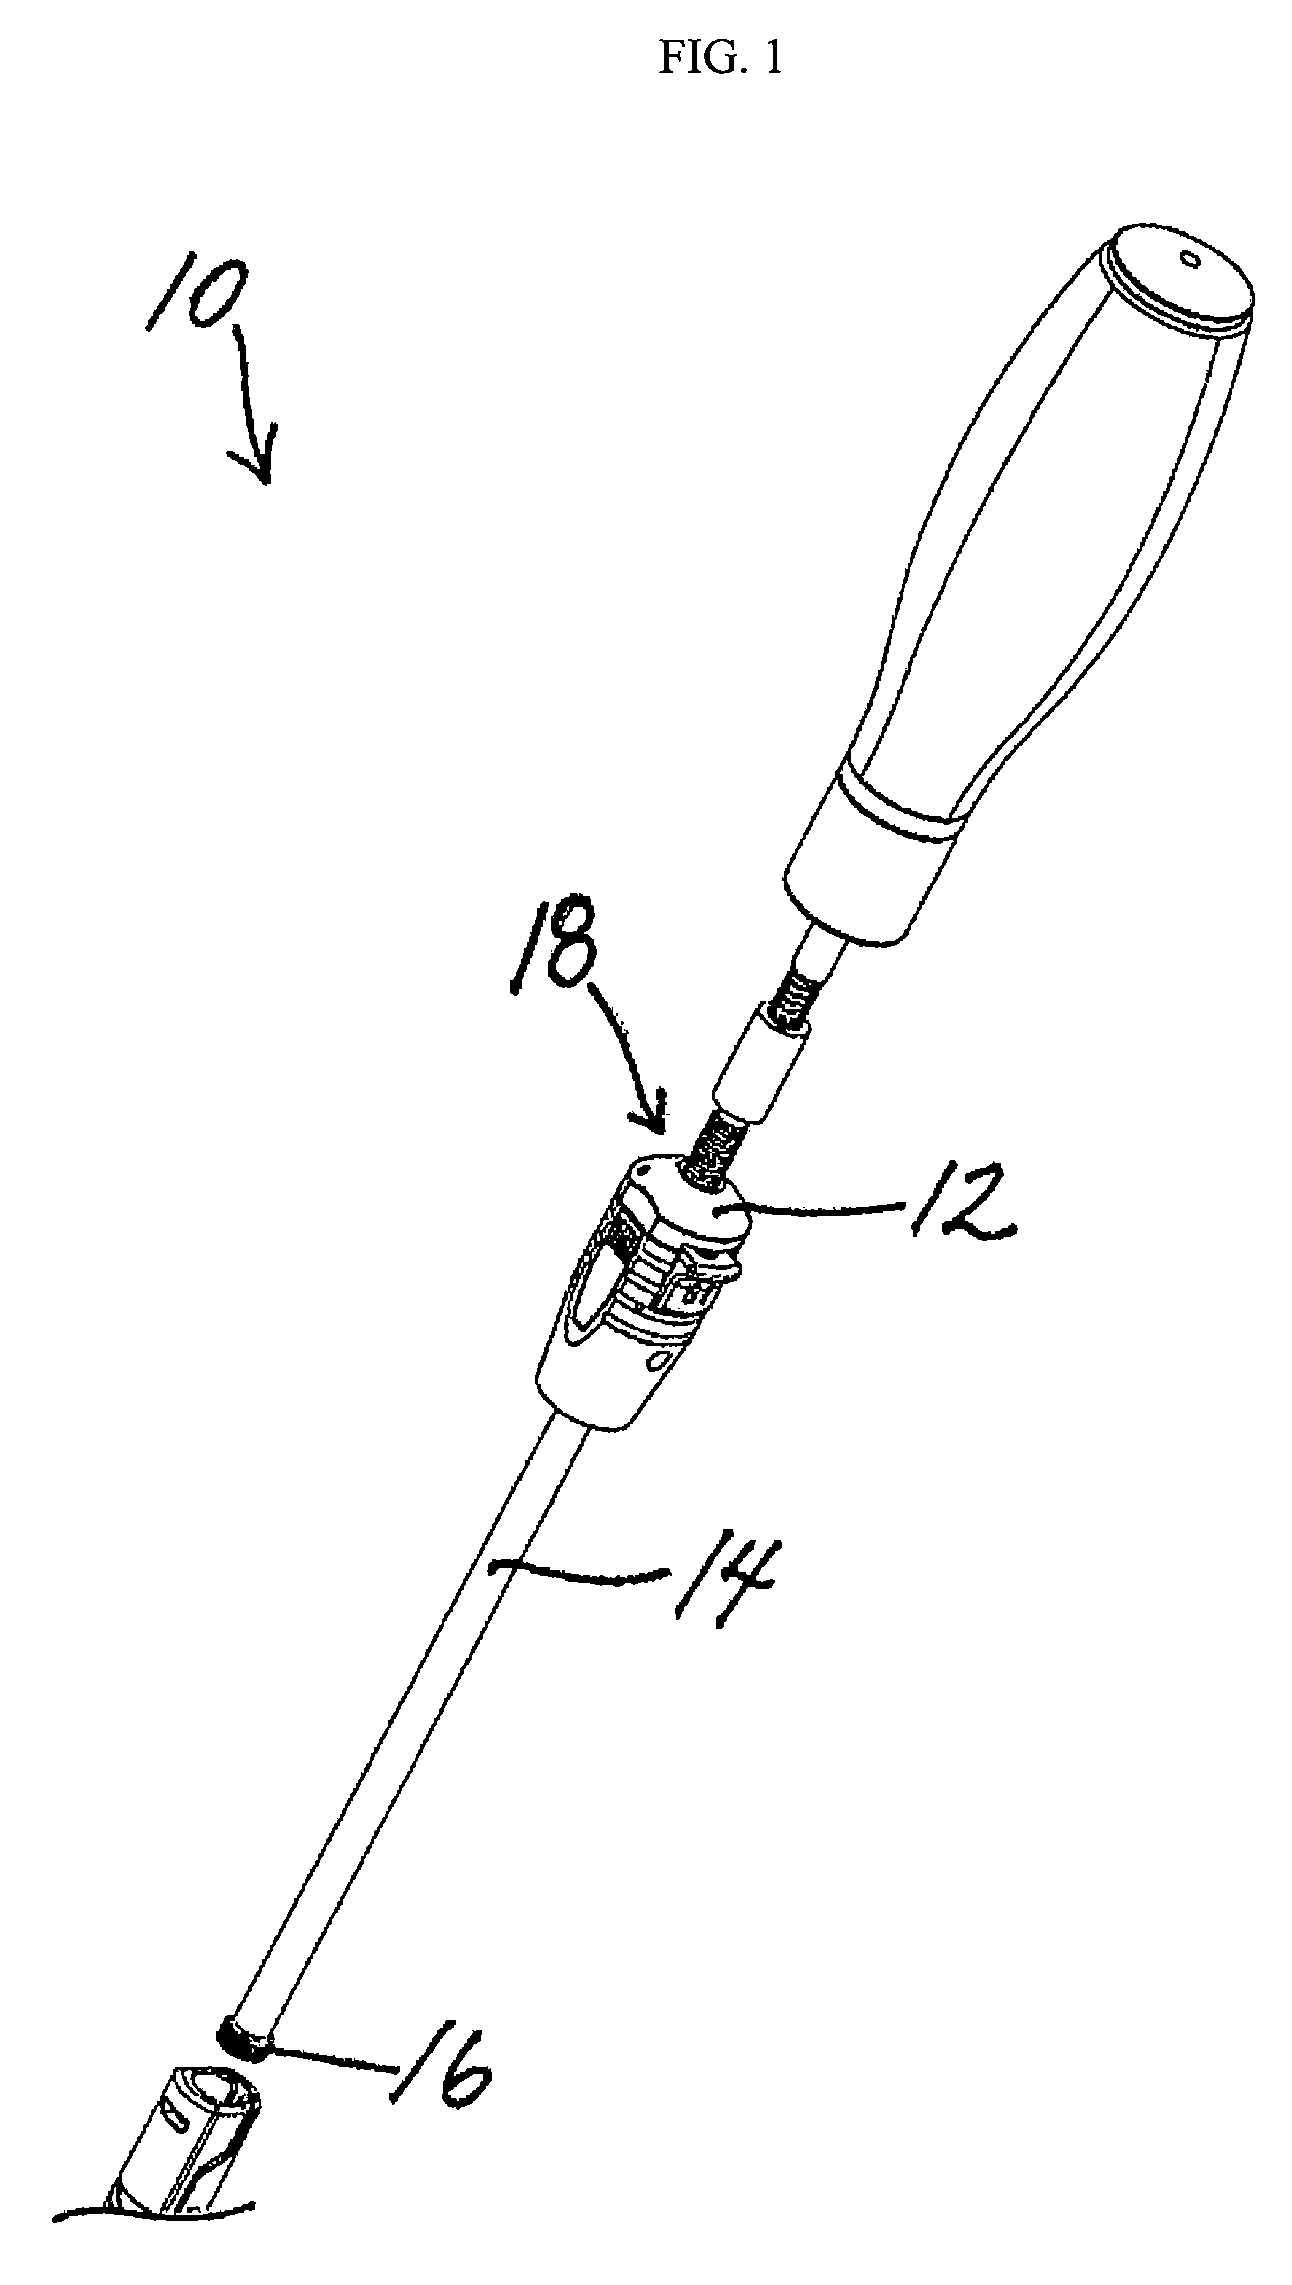 In-line rod reduction device and methods